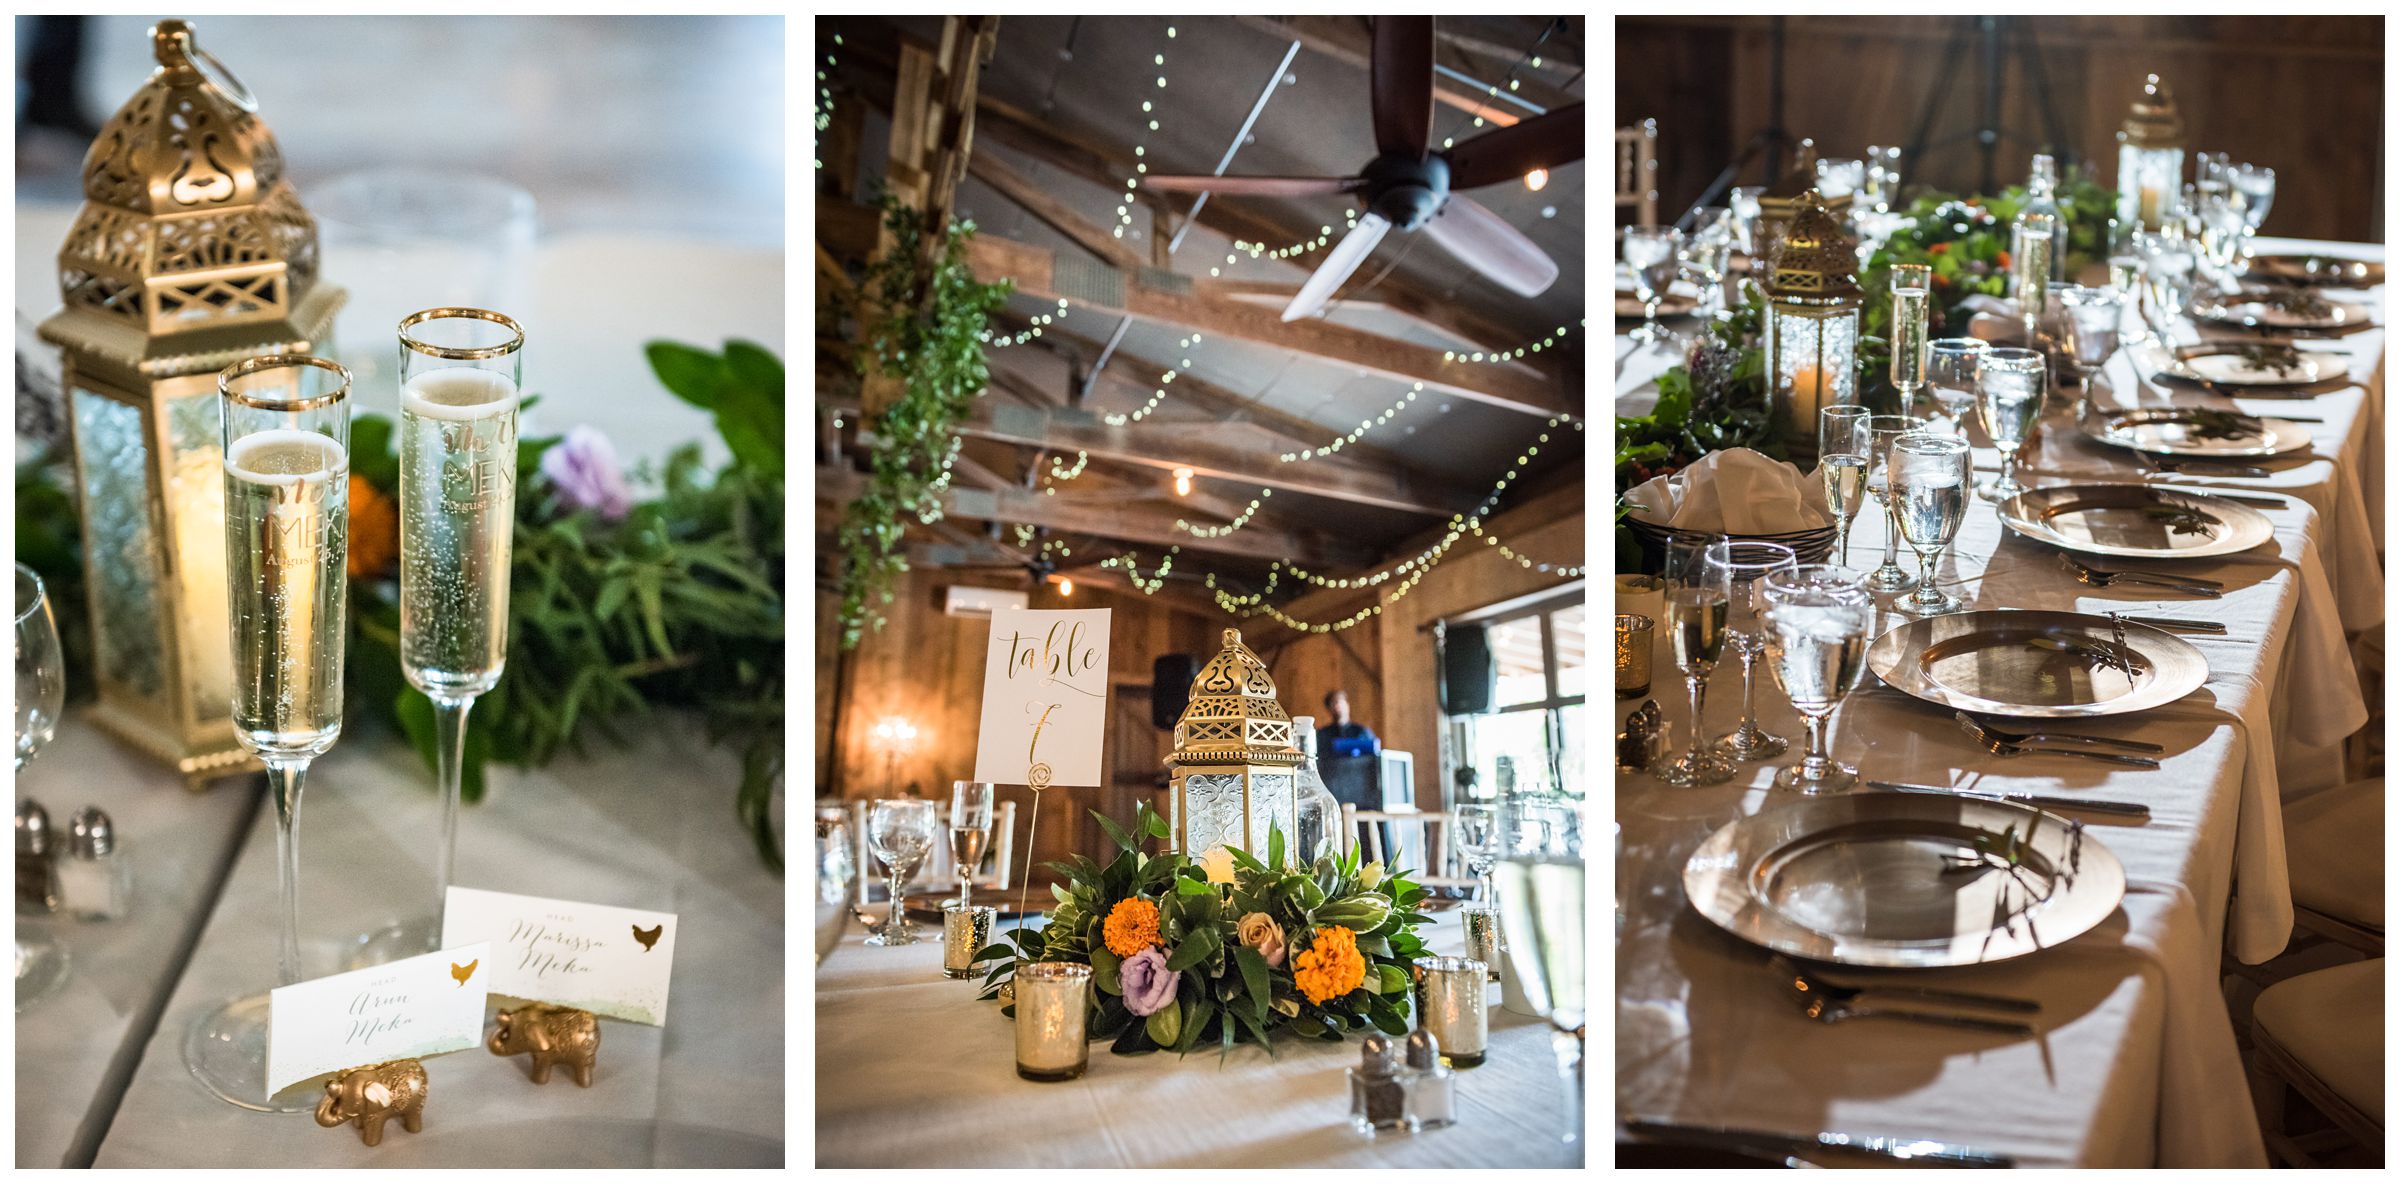 Jorgensen Farms Historic Barn wedding reception with greenery and gold decor including Indian elephants